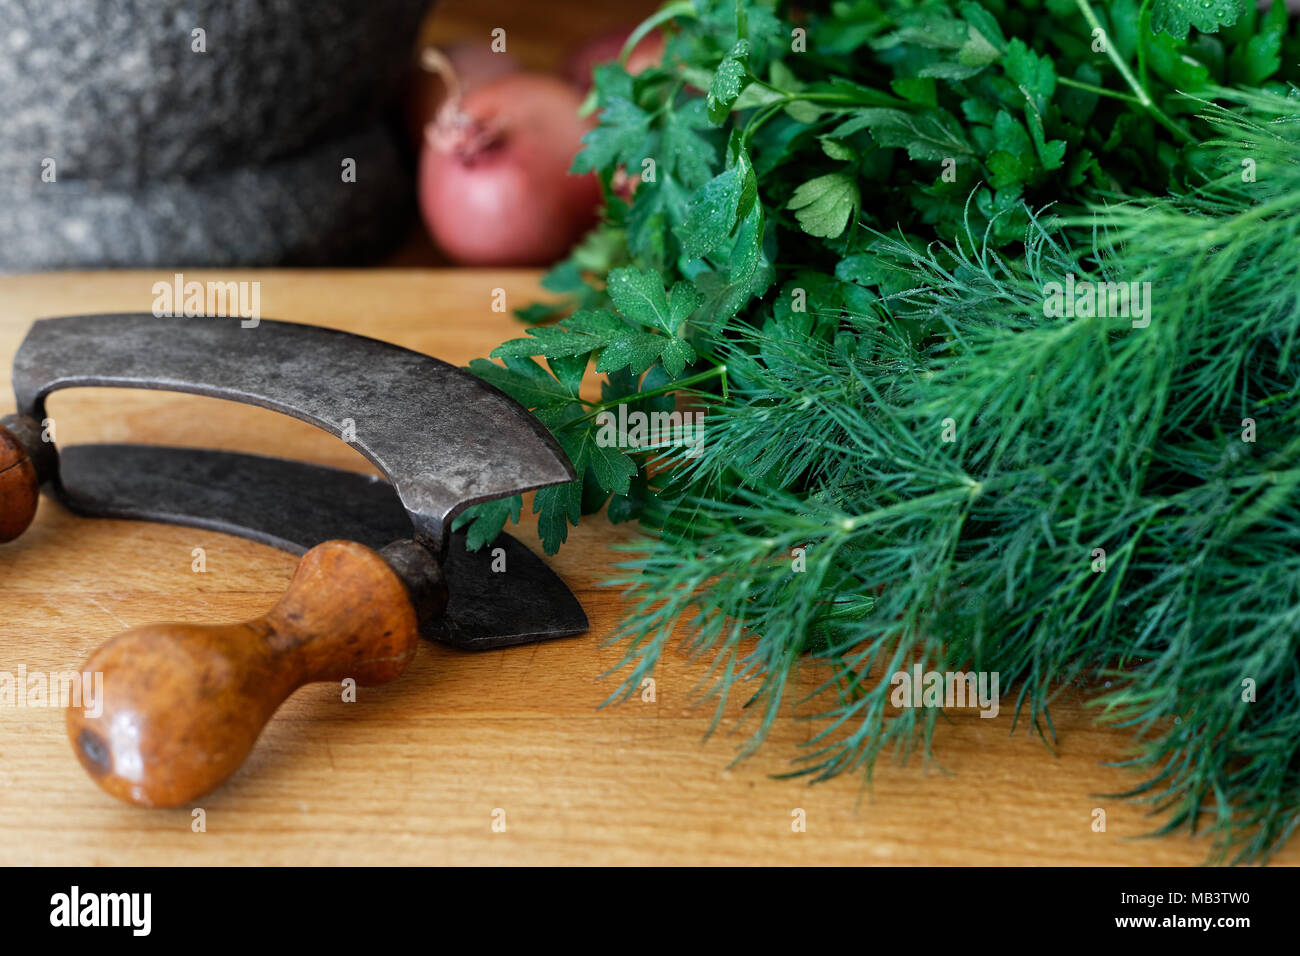 https://c8.alamy.com/comp/MB3TW0/rustic-double-blade-mezzaluna-herb-cutter-on-wood-board-next-to-a-large-bunch-of-fresh-herbs-MB3TW0.jpg